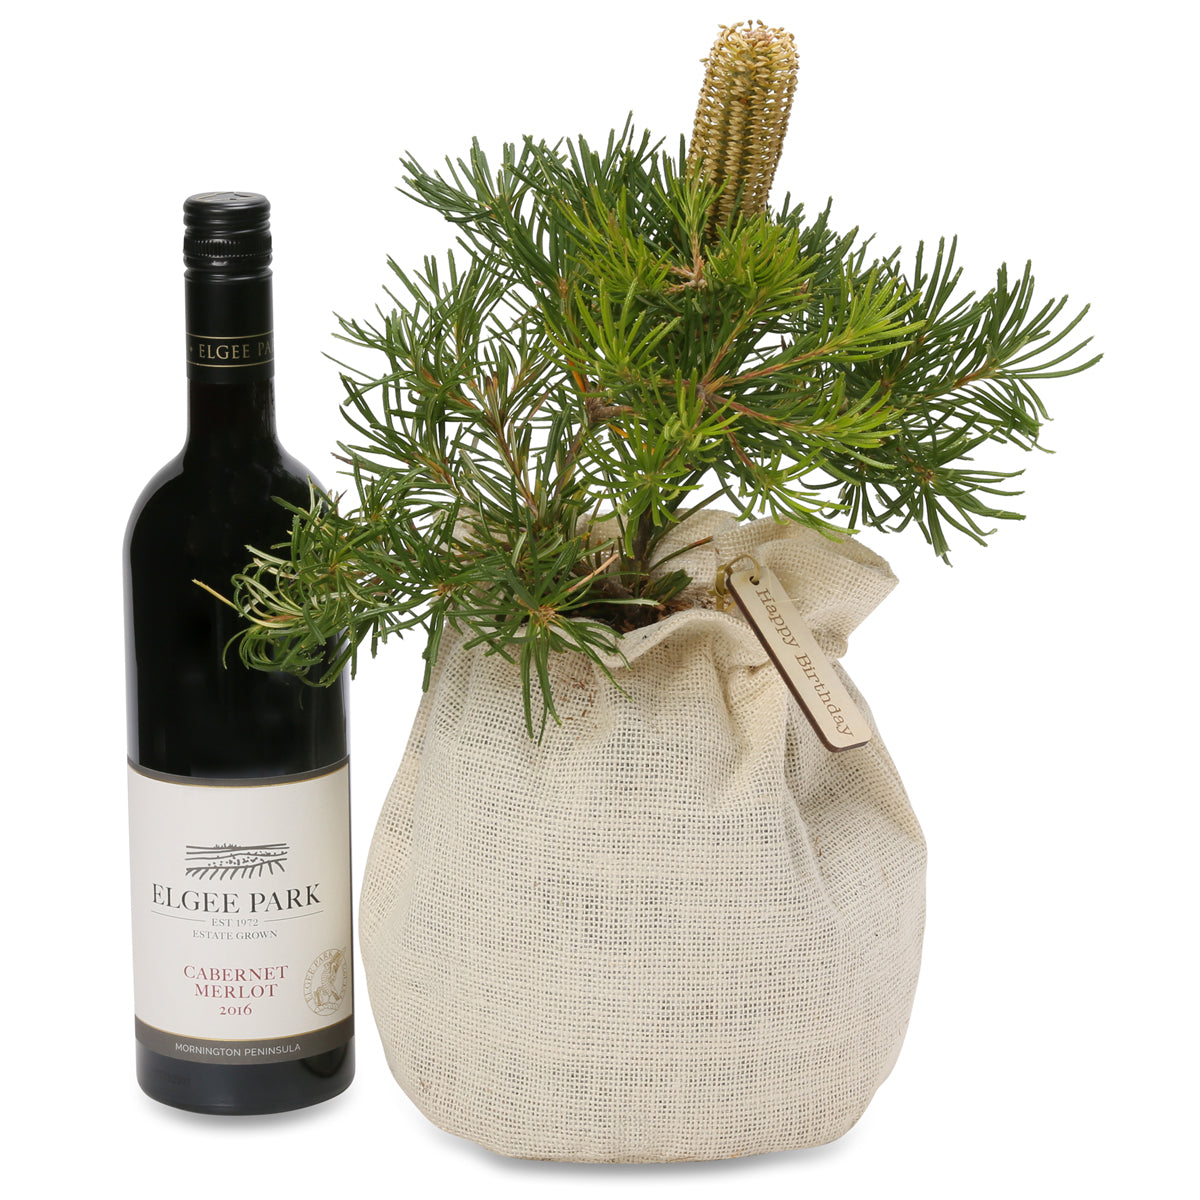 Banksia Birthday candles wine lovers gift